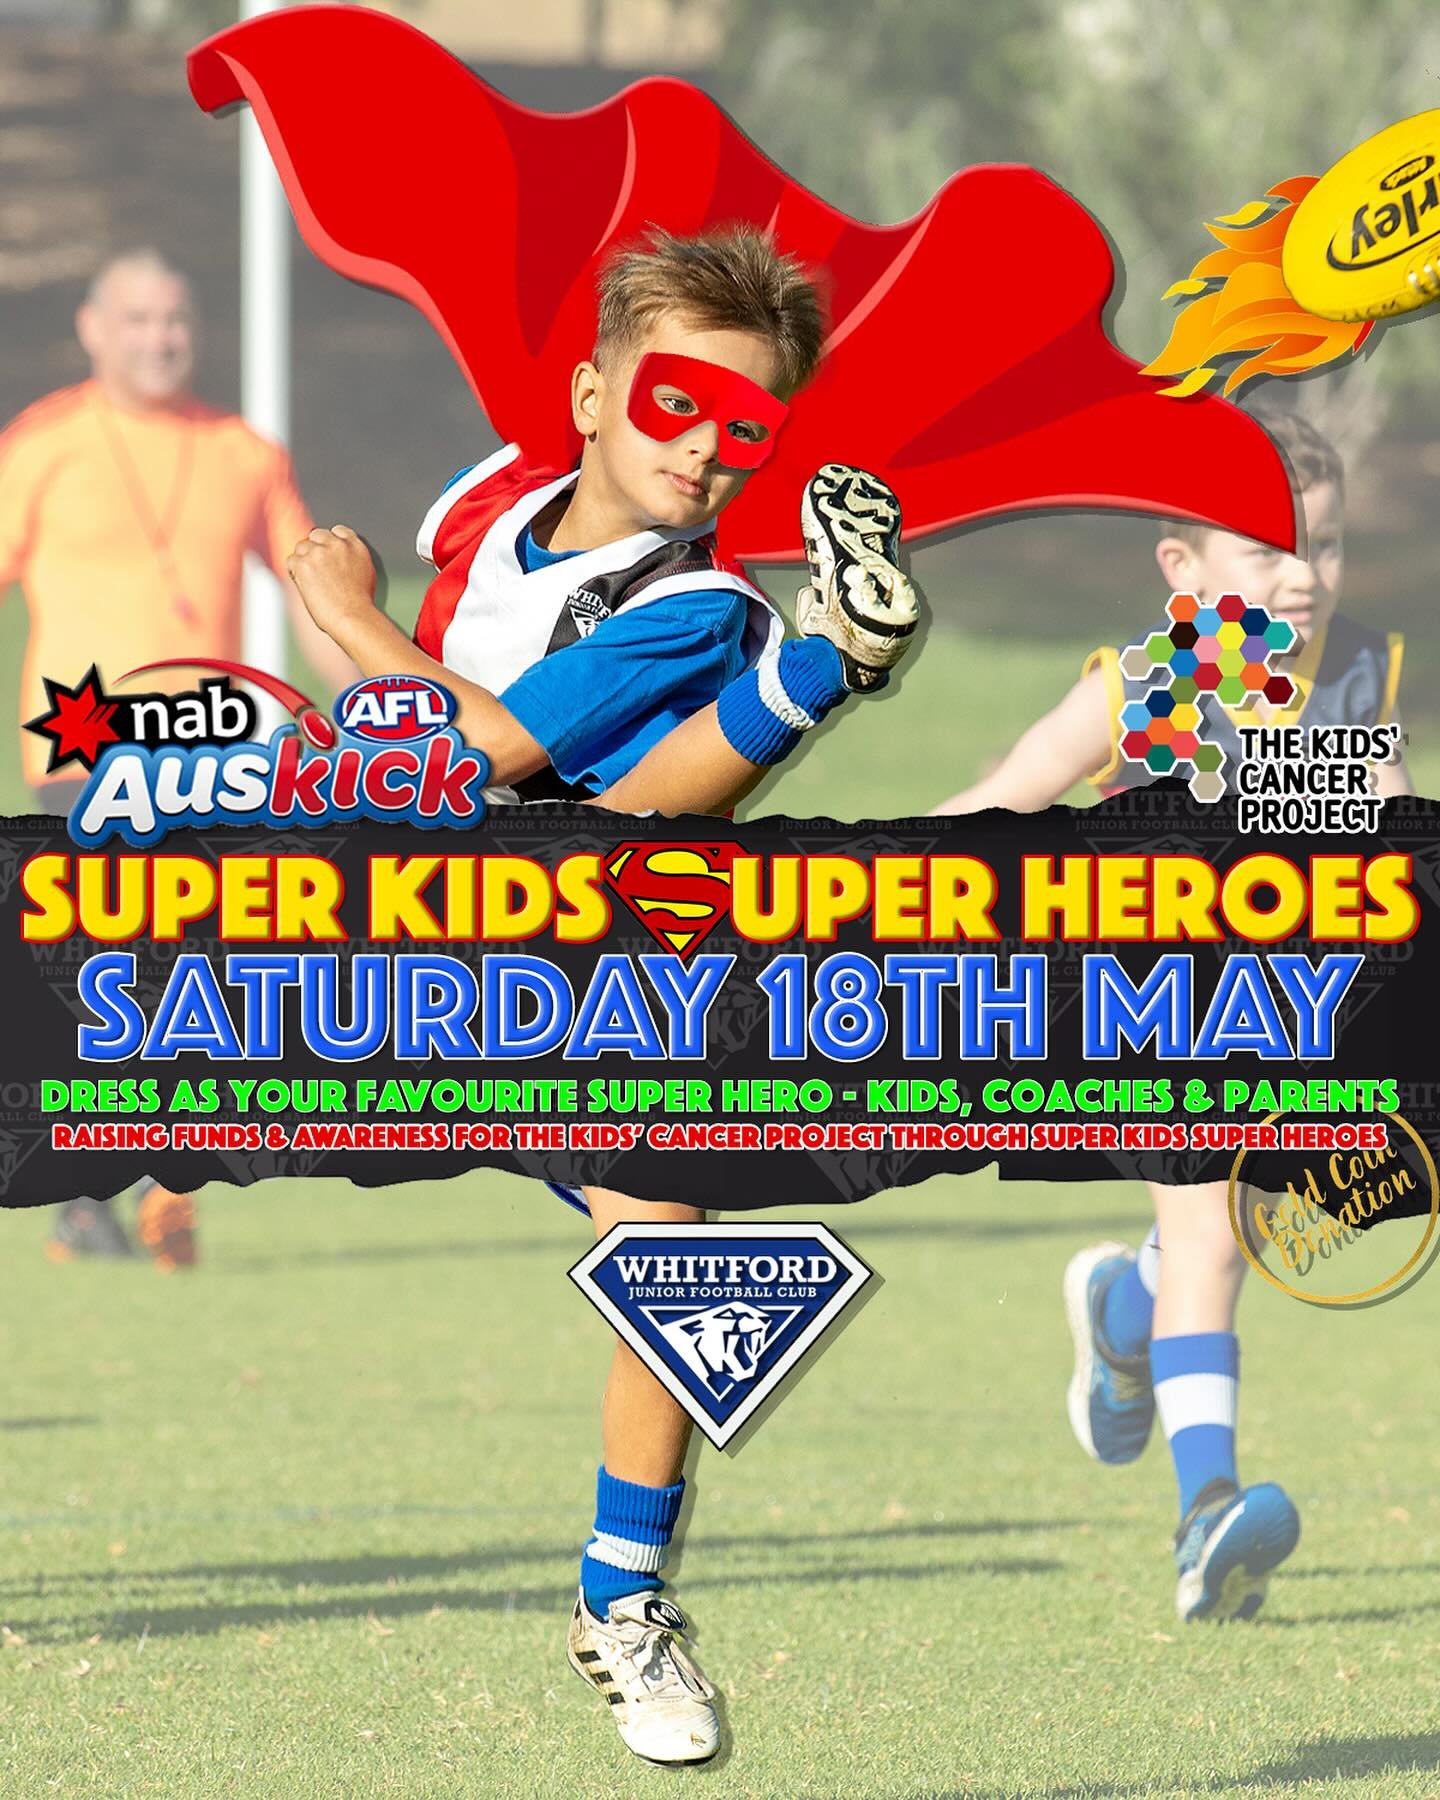 Attention ALL AUSKICKERS&hellip; 
This Saturday the 18th of May is the @aflauskick Super Kids Super Hero Round where we are encouraging all players, coaches, managers and parents to dress as their favourite SuperHero!
We are also asking for a Gold Co